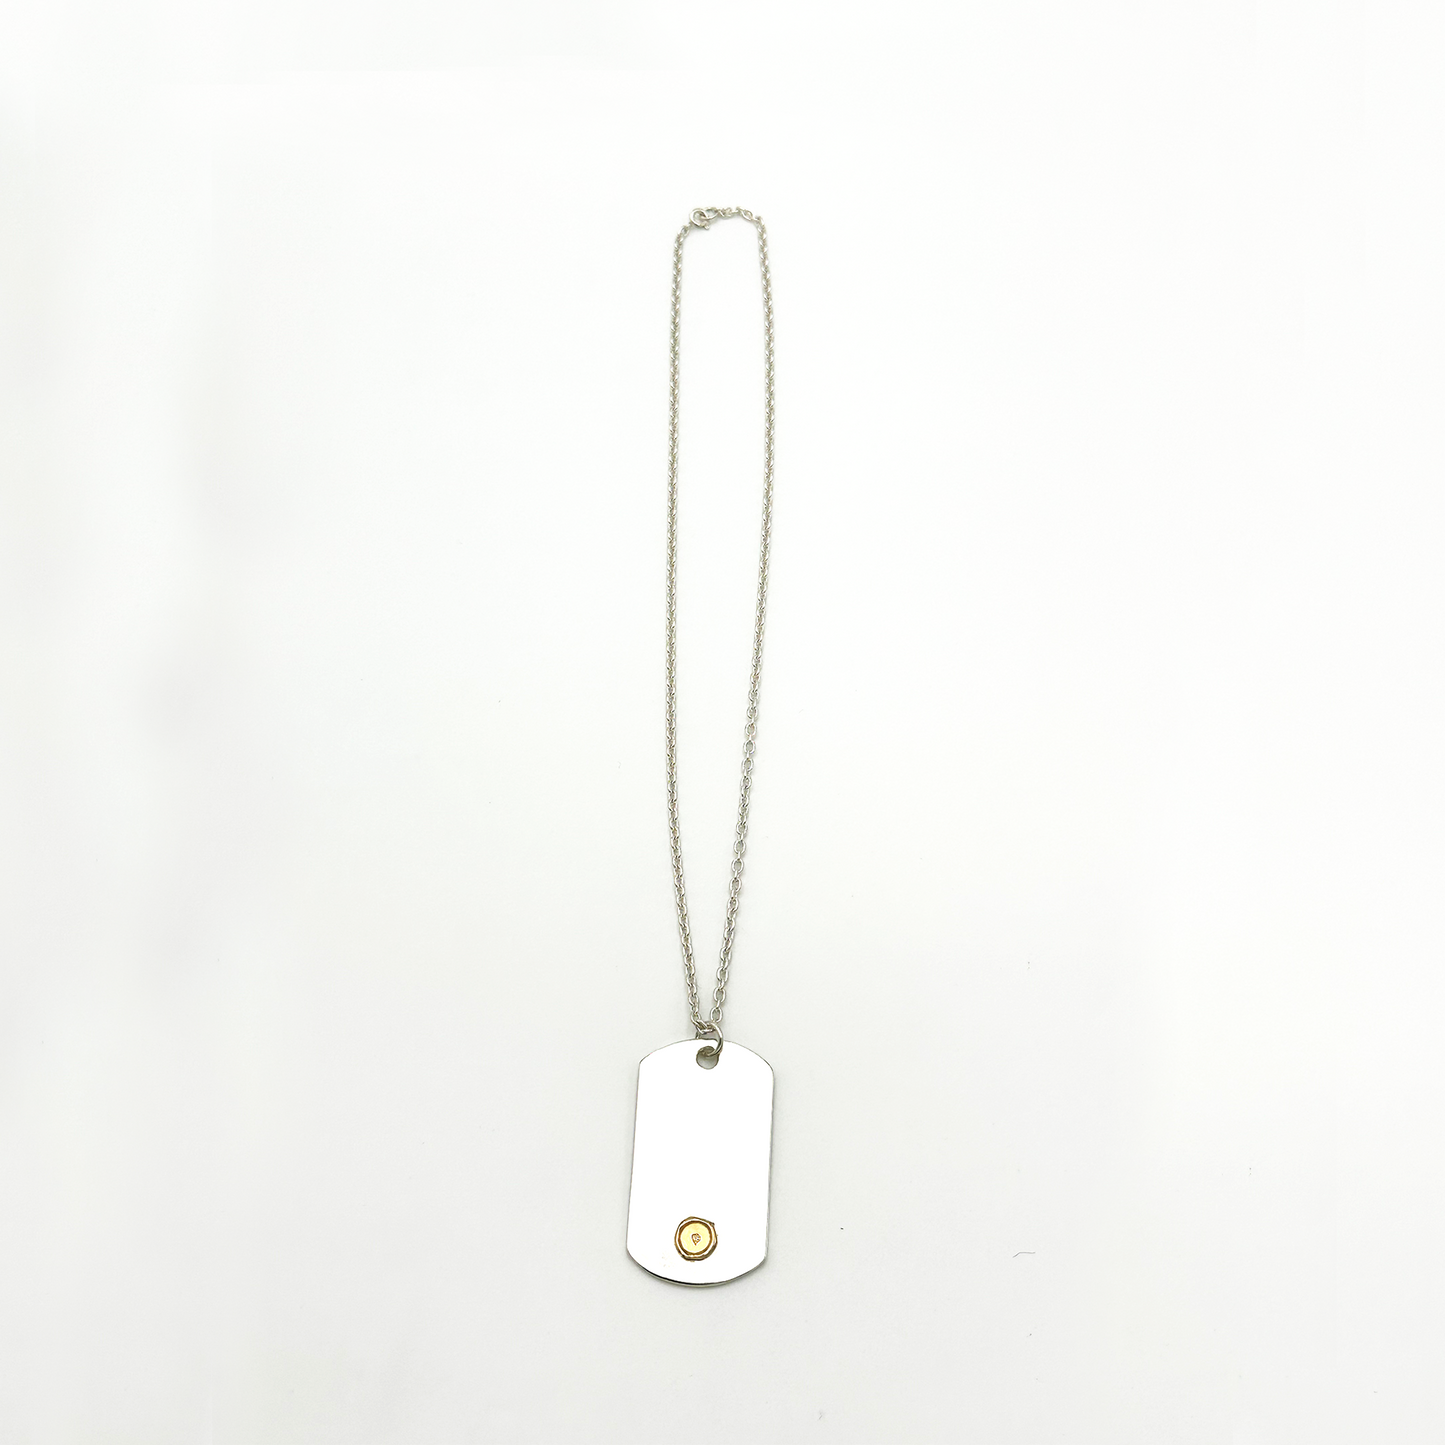 Plate-Gold Seal XM ID Tag Chain Necklace